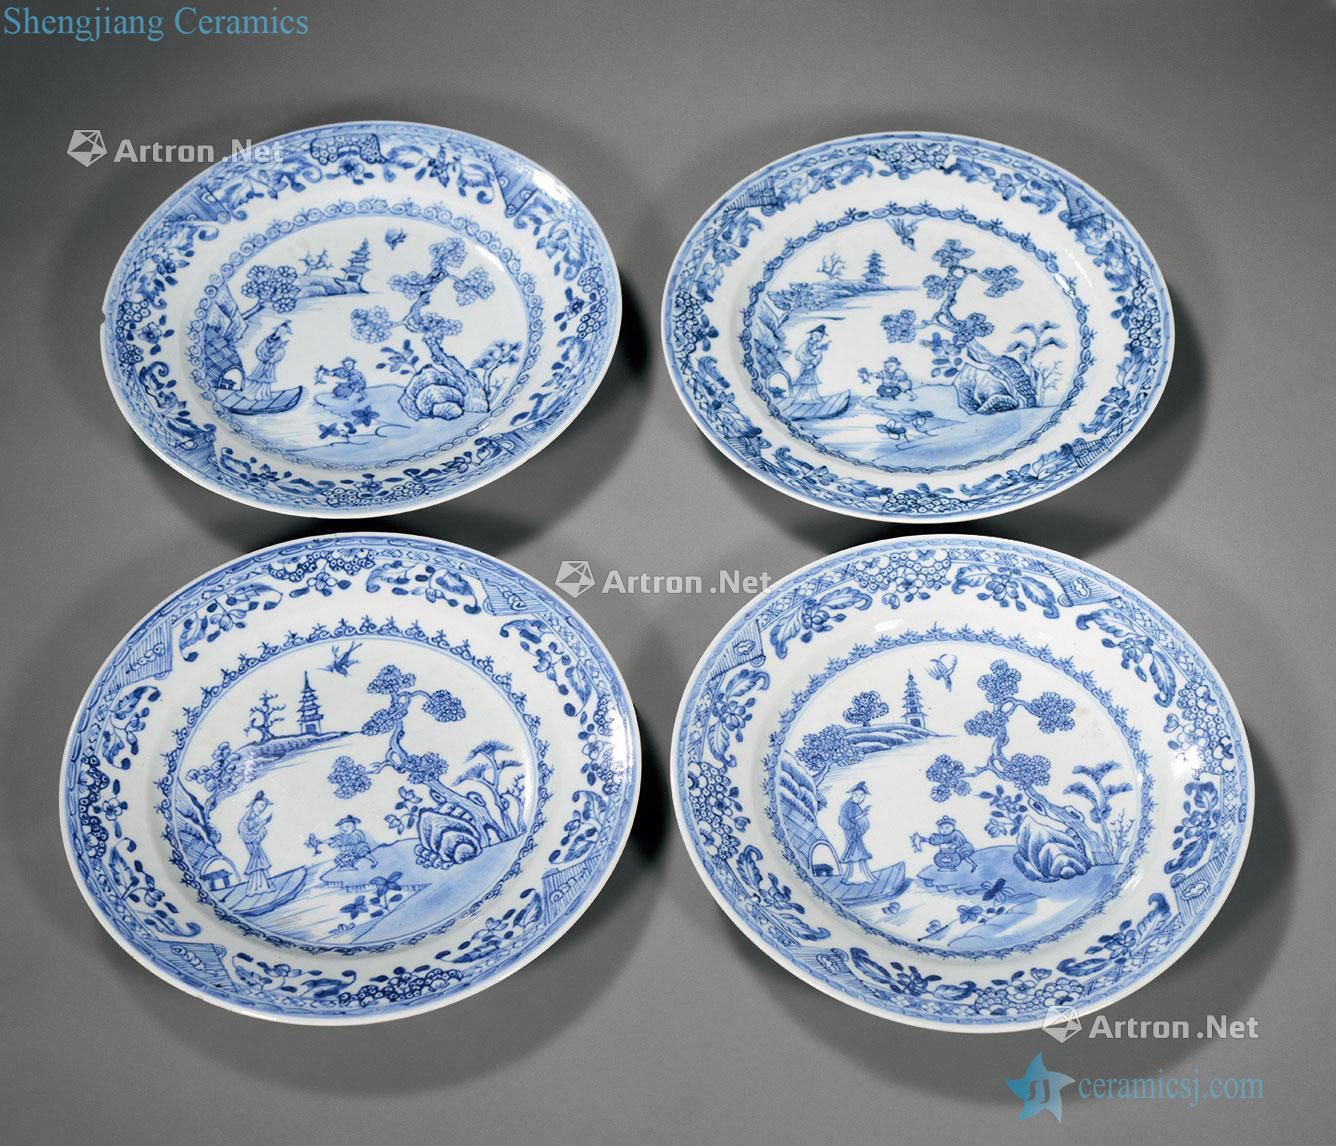 The stories of the qing emperor kangxi porcelain plate (4)